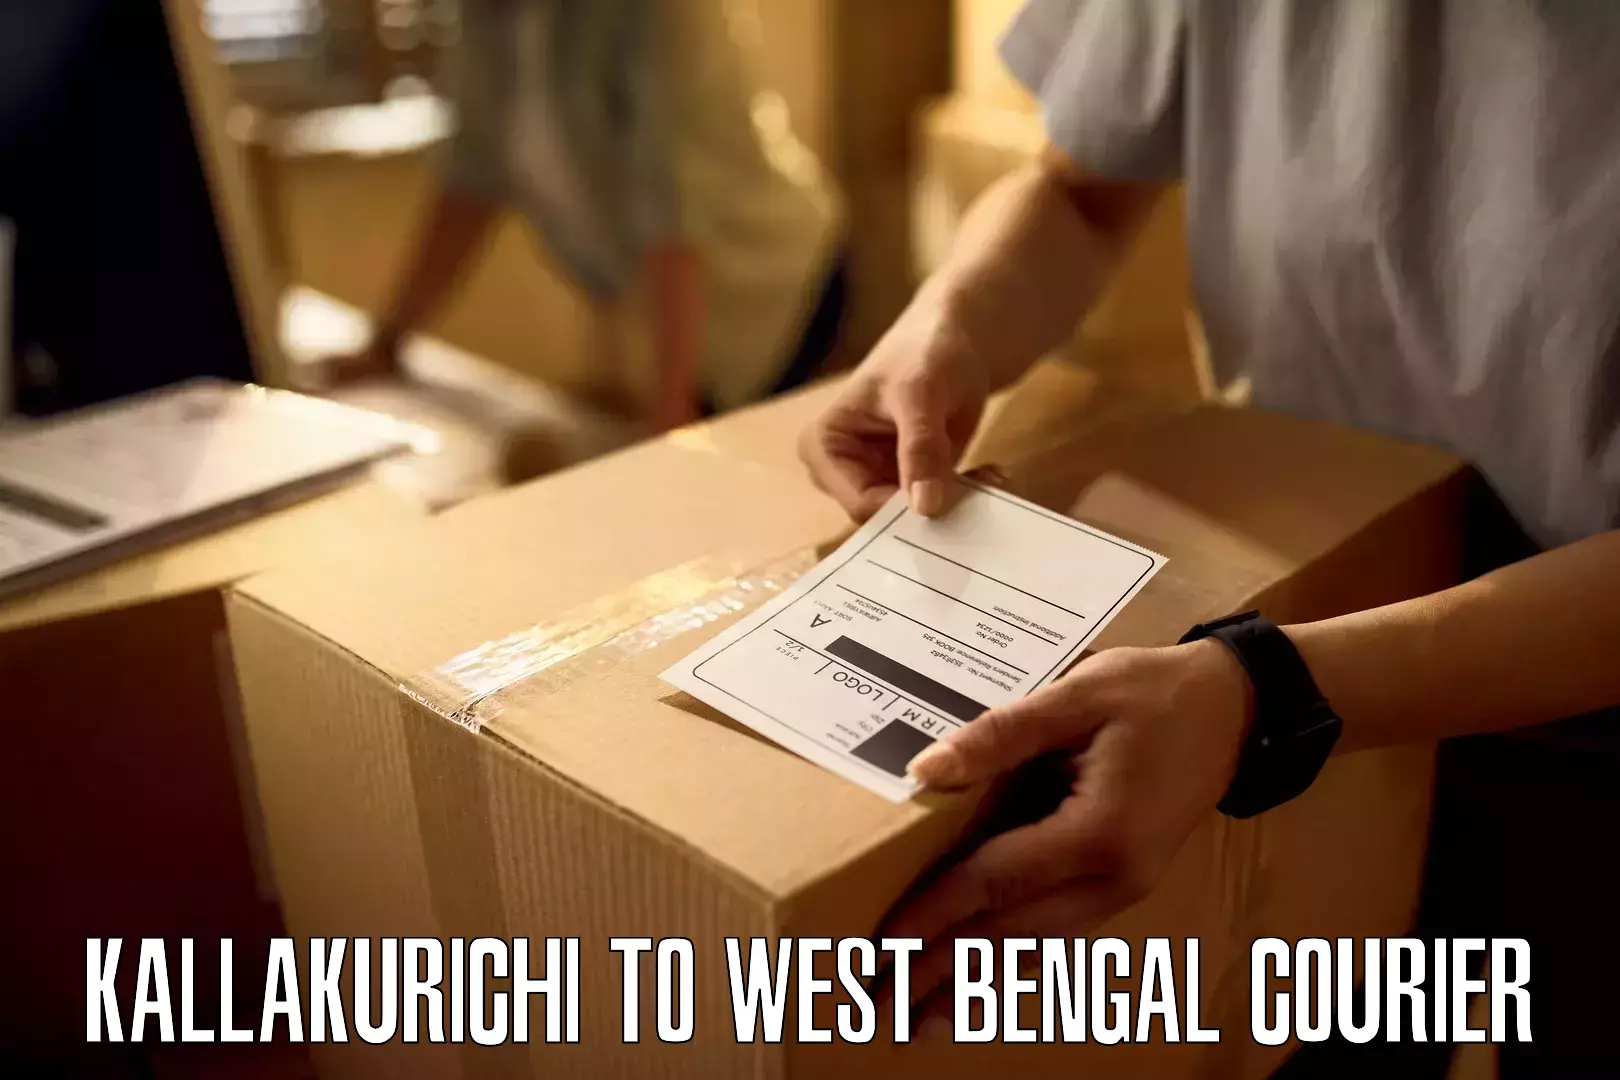 Global freight services Kallakurichi to West Bengal